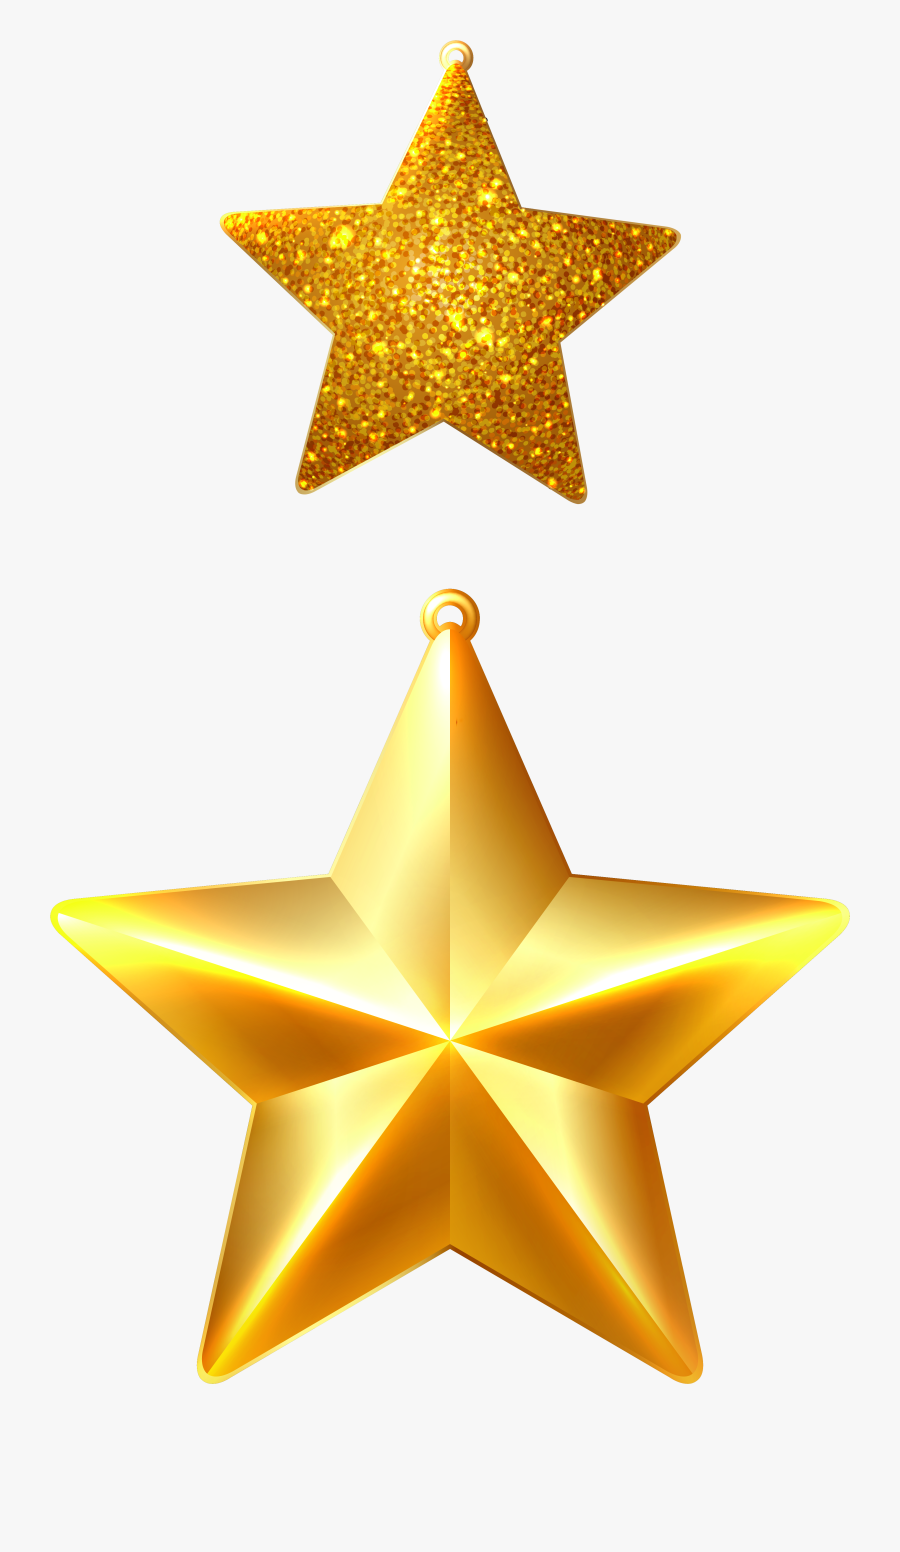 Christmas Stars Ornaments Png Clipart Image - Christmas Decorations Clipart Star, Transparent Clipart